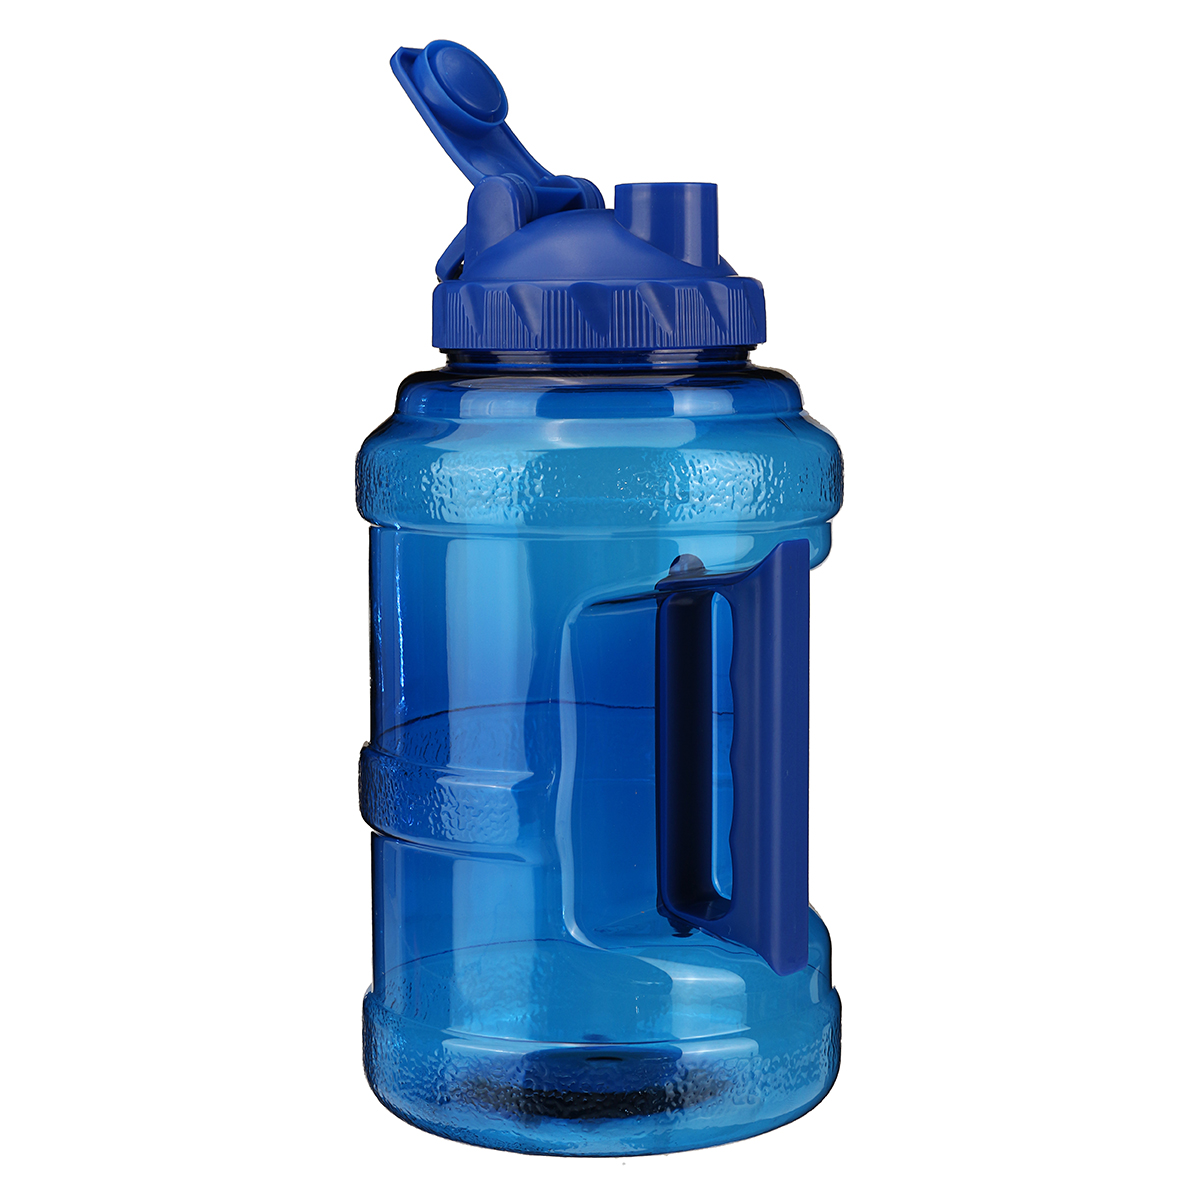 25L-Large-Capacity-Sports-Water-Bottle-with-Handle-PET-Portable-Bucket-Cup-Outdoor-Sports-Fitness-Cu-1898505-5